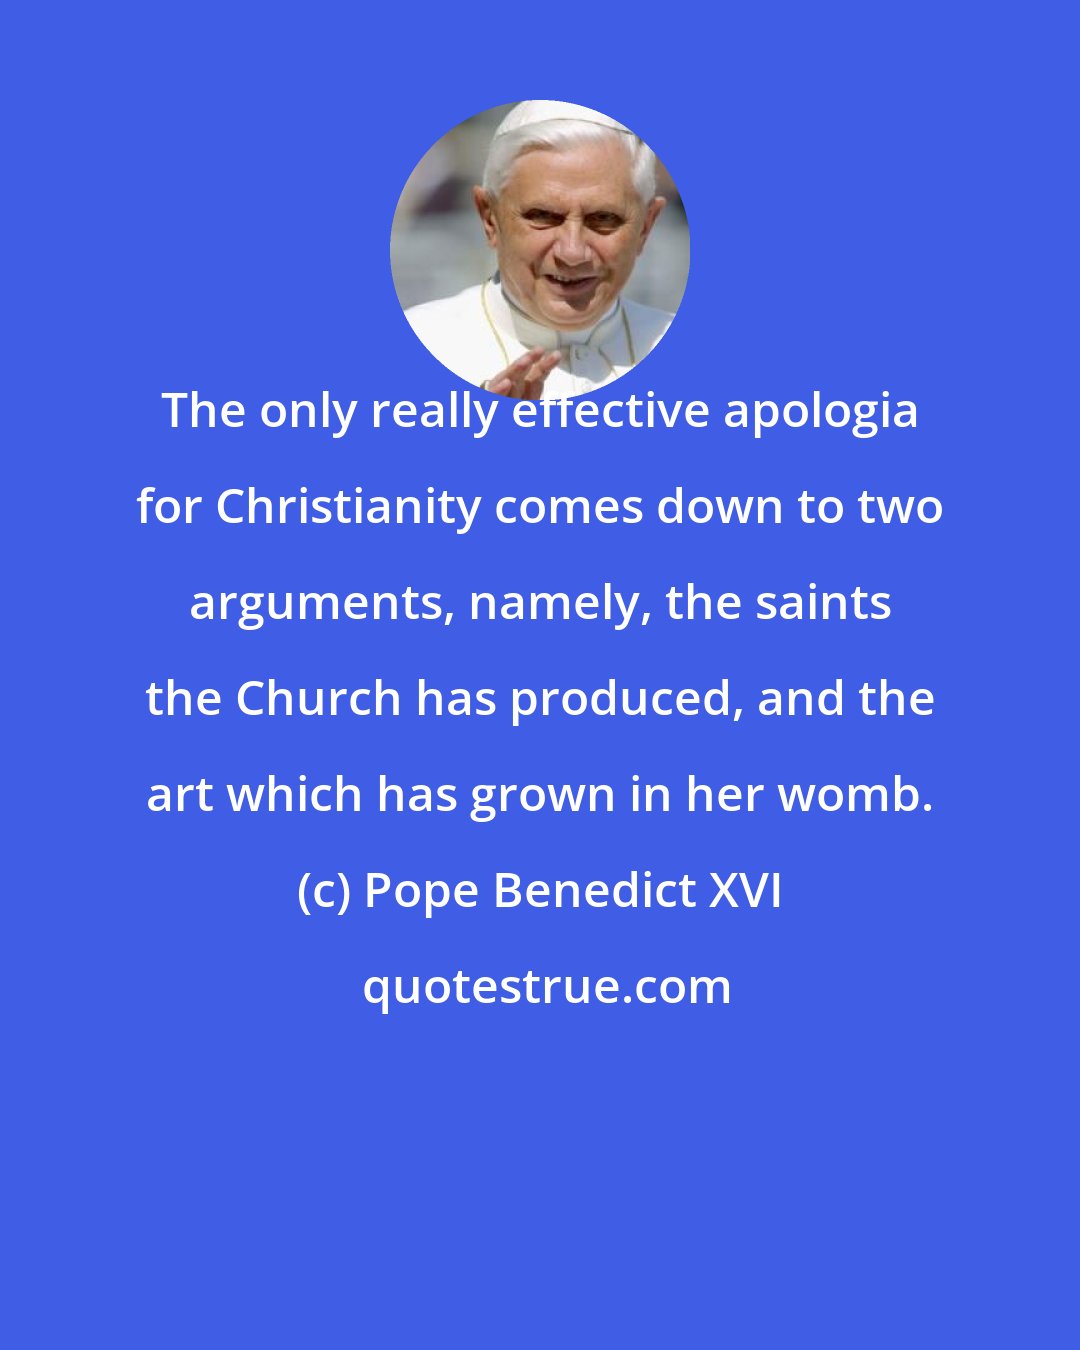 Pope Benedict XVI: The only really effective apologia for Christianity comes down to two arguments, namely, the saints the Church has produced, and the art which has grown in her womb.